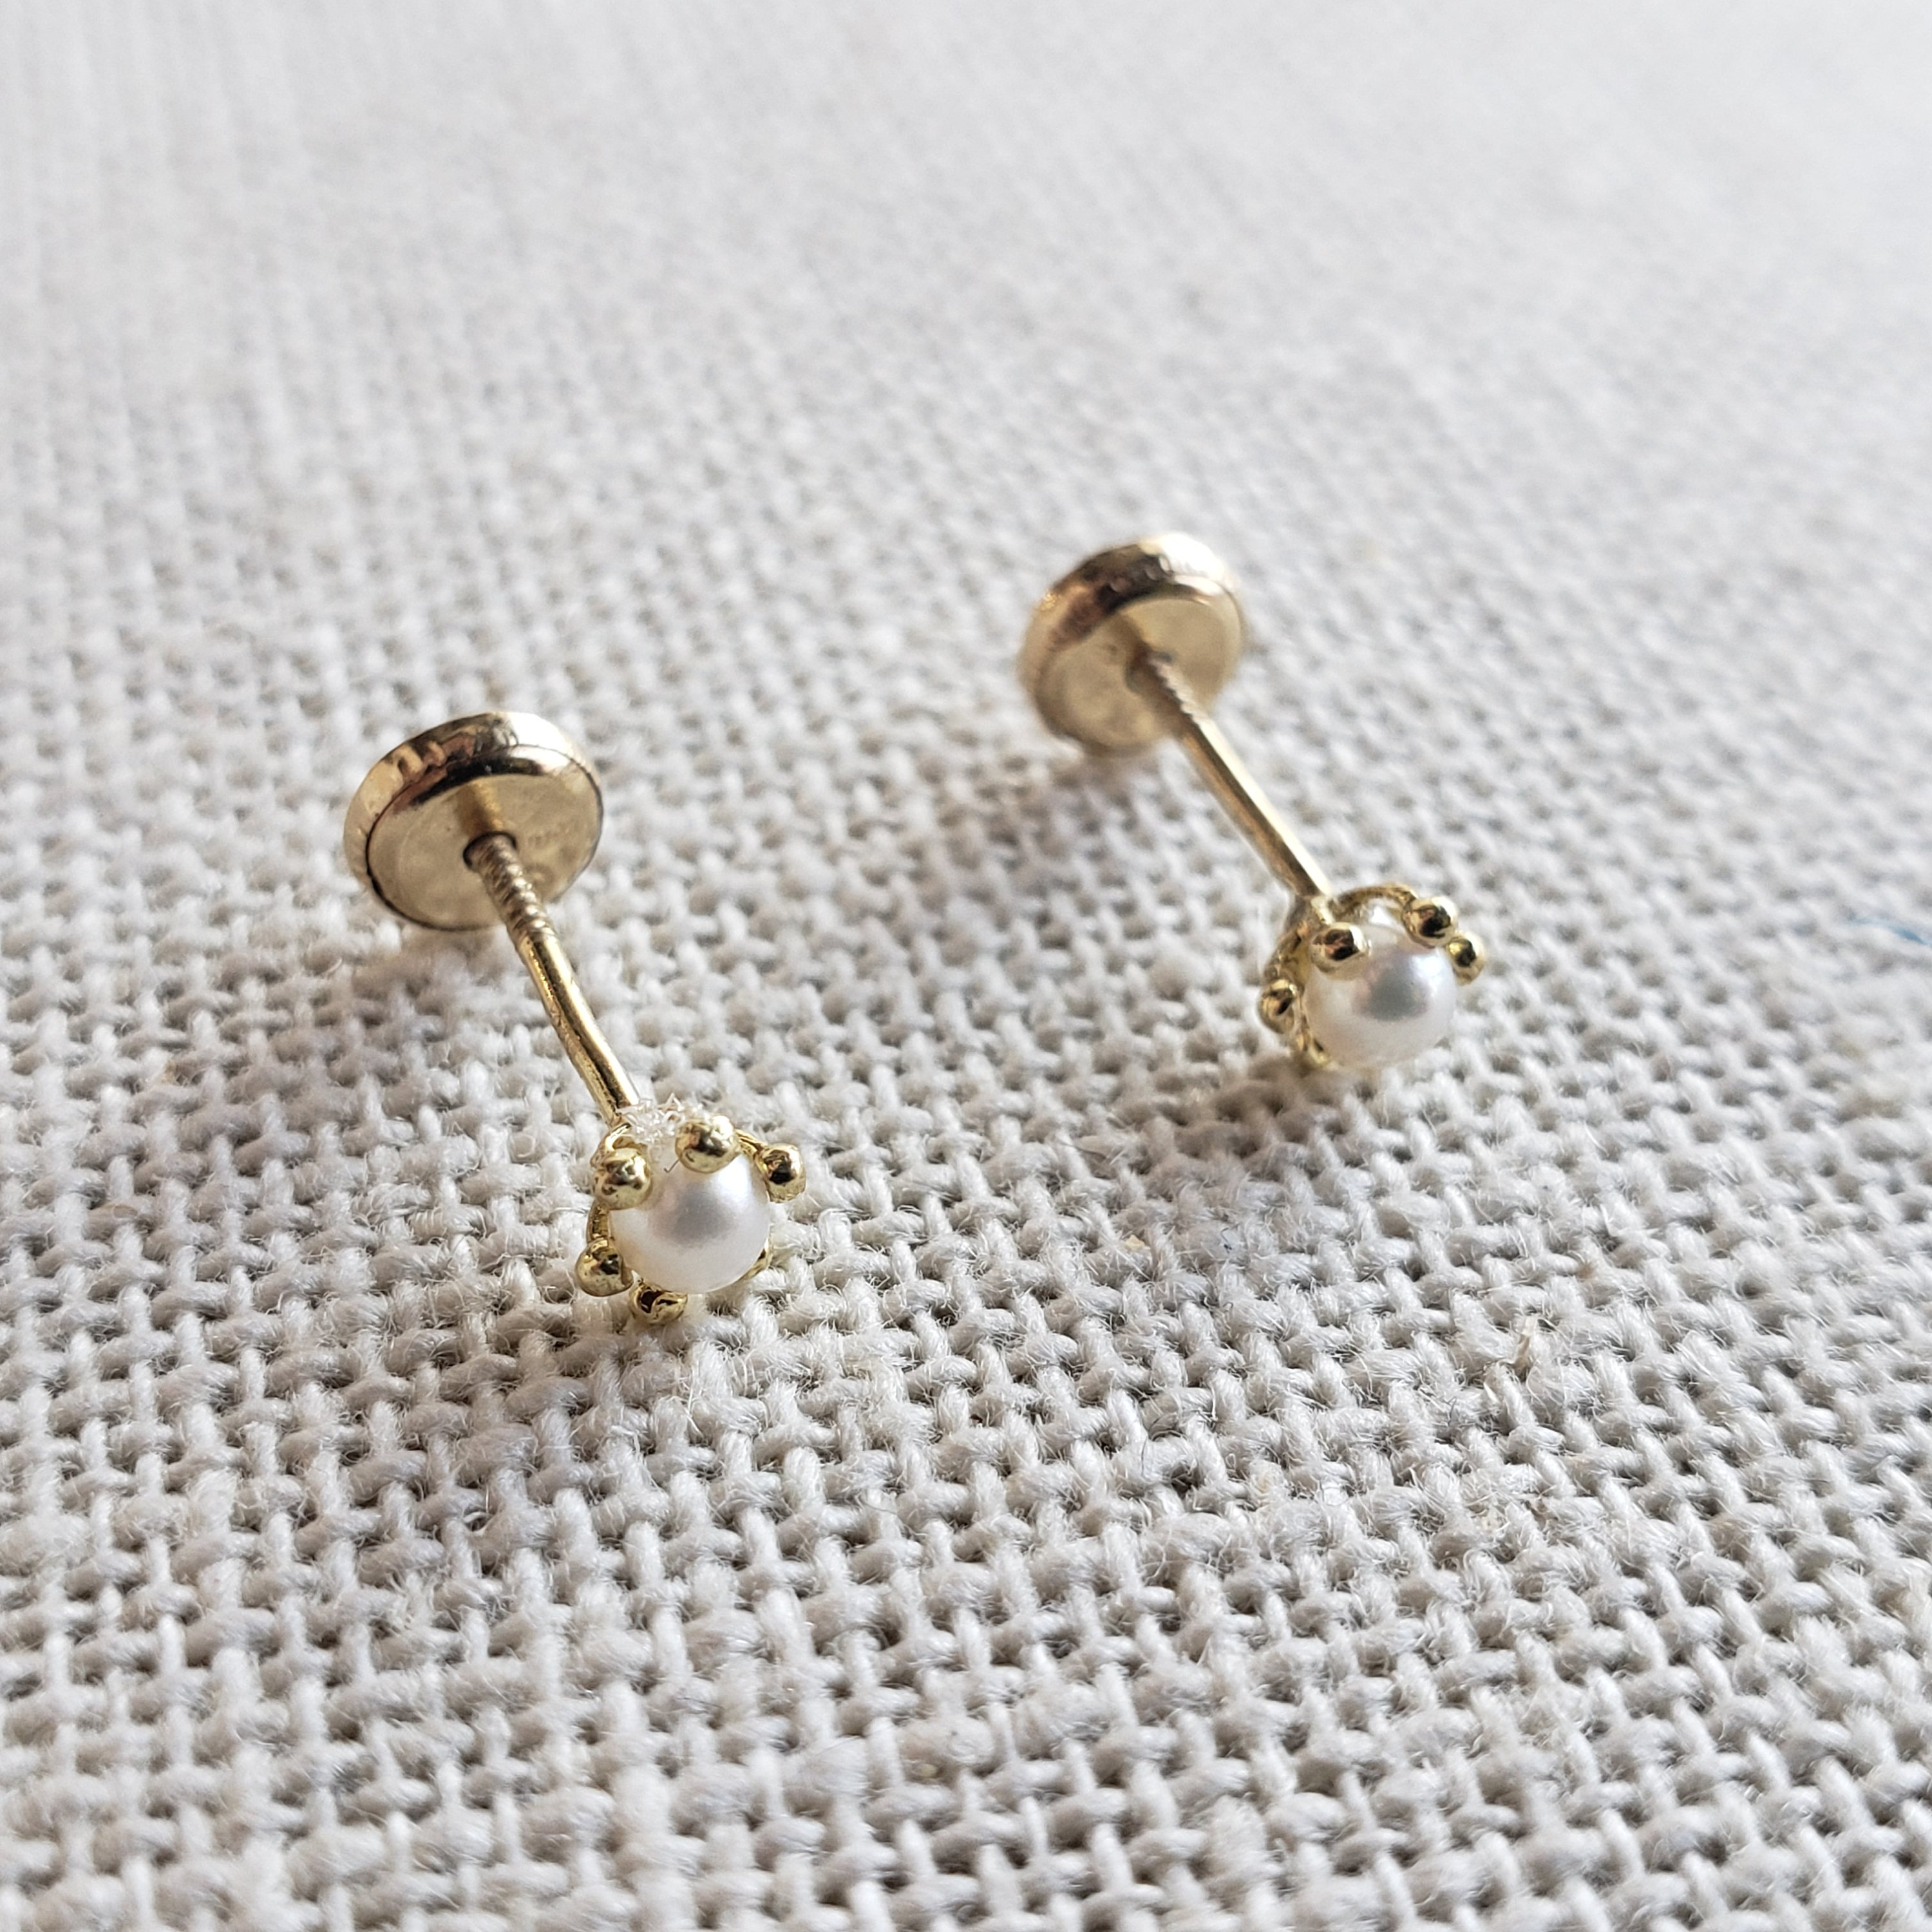  Gold Plated White Simulated Pearl Screw Back Earrings for  Babies, Infants, and Toddlers 3mm - Classic White Simulated Pearl Baby  Earrings with Safety Screw Backs: Clothing, Shoes & Jewelry